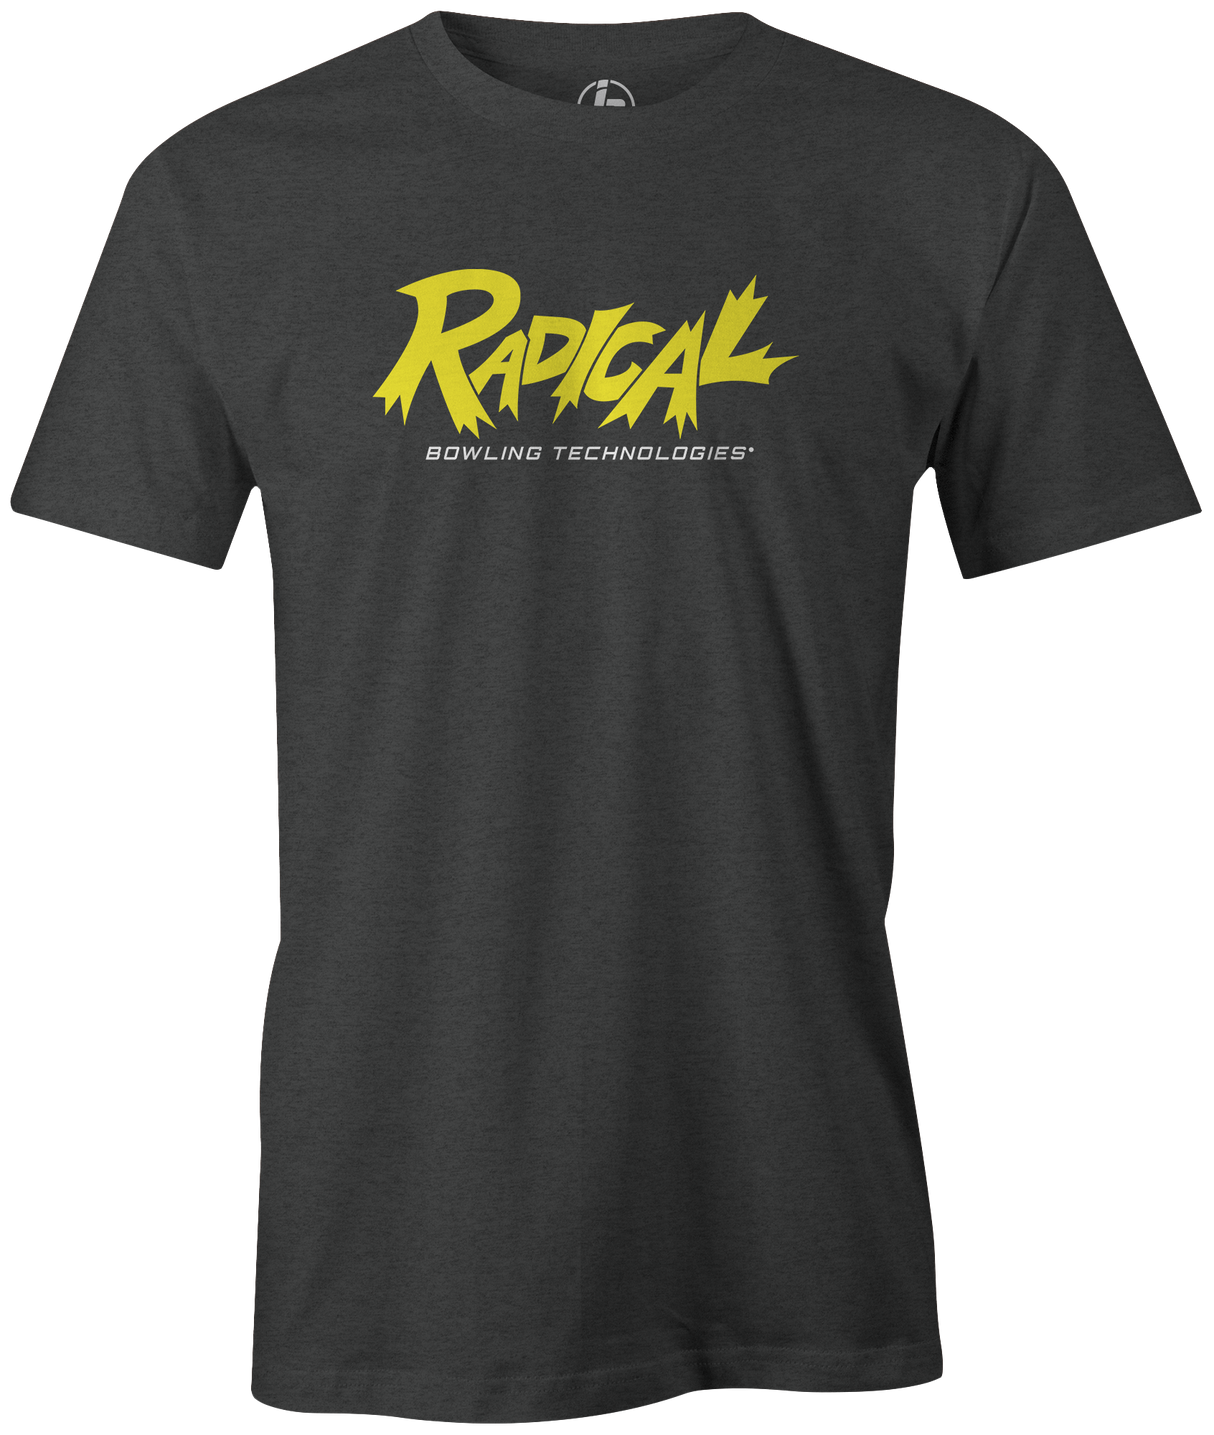 Putting the R in Radical! Radical Bowling Technologies R Shirt  Reactive Resin Bowling Ball tee vintage retro league tournaments. Check out this Radical Technologies "R" logo bowling league tee (t-shirt, tees, tshirt, teeshirt) available at Inside Bowling. Comfortable cheap discounted special bowling shirts for bowlers online. Get what you can't get on Amazon, Walmart, Target, or E-Bay here.